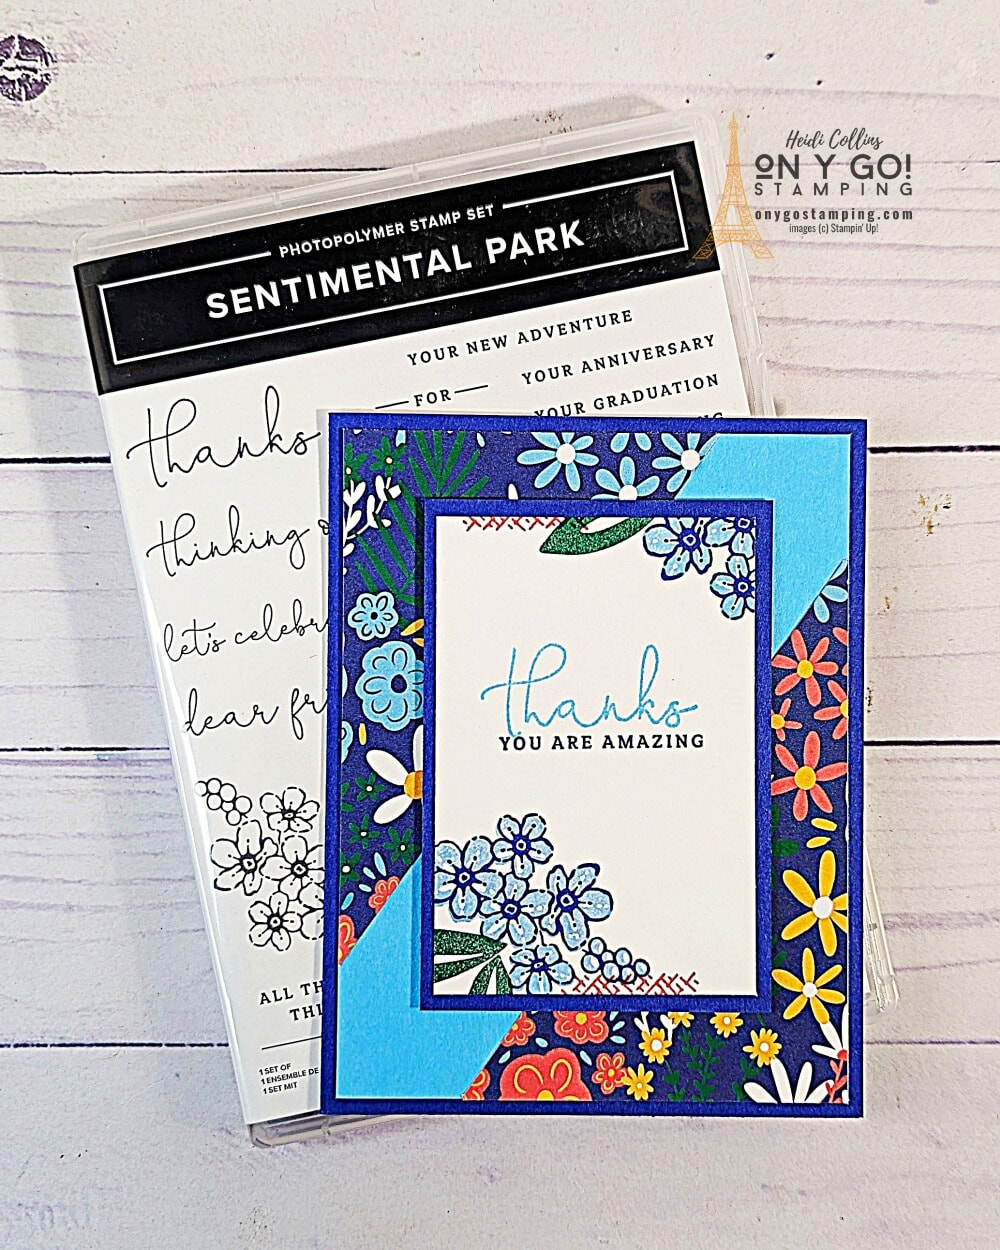 Floral handmade thank you card using the Sentimental Park stamp set and Flowers & More patterned paper from Stampin' Up! This card is quick and easy to make with a simple card sketch.